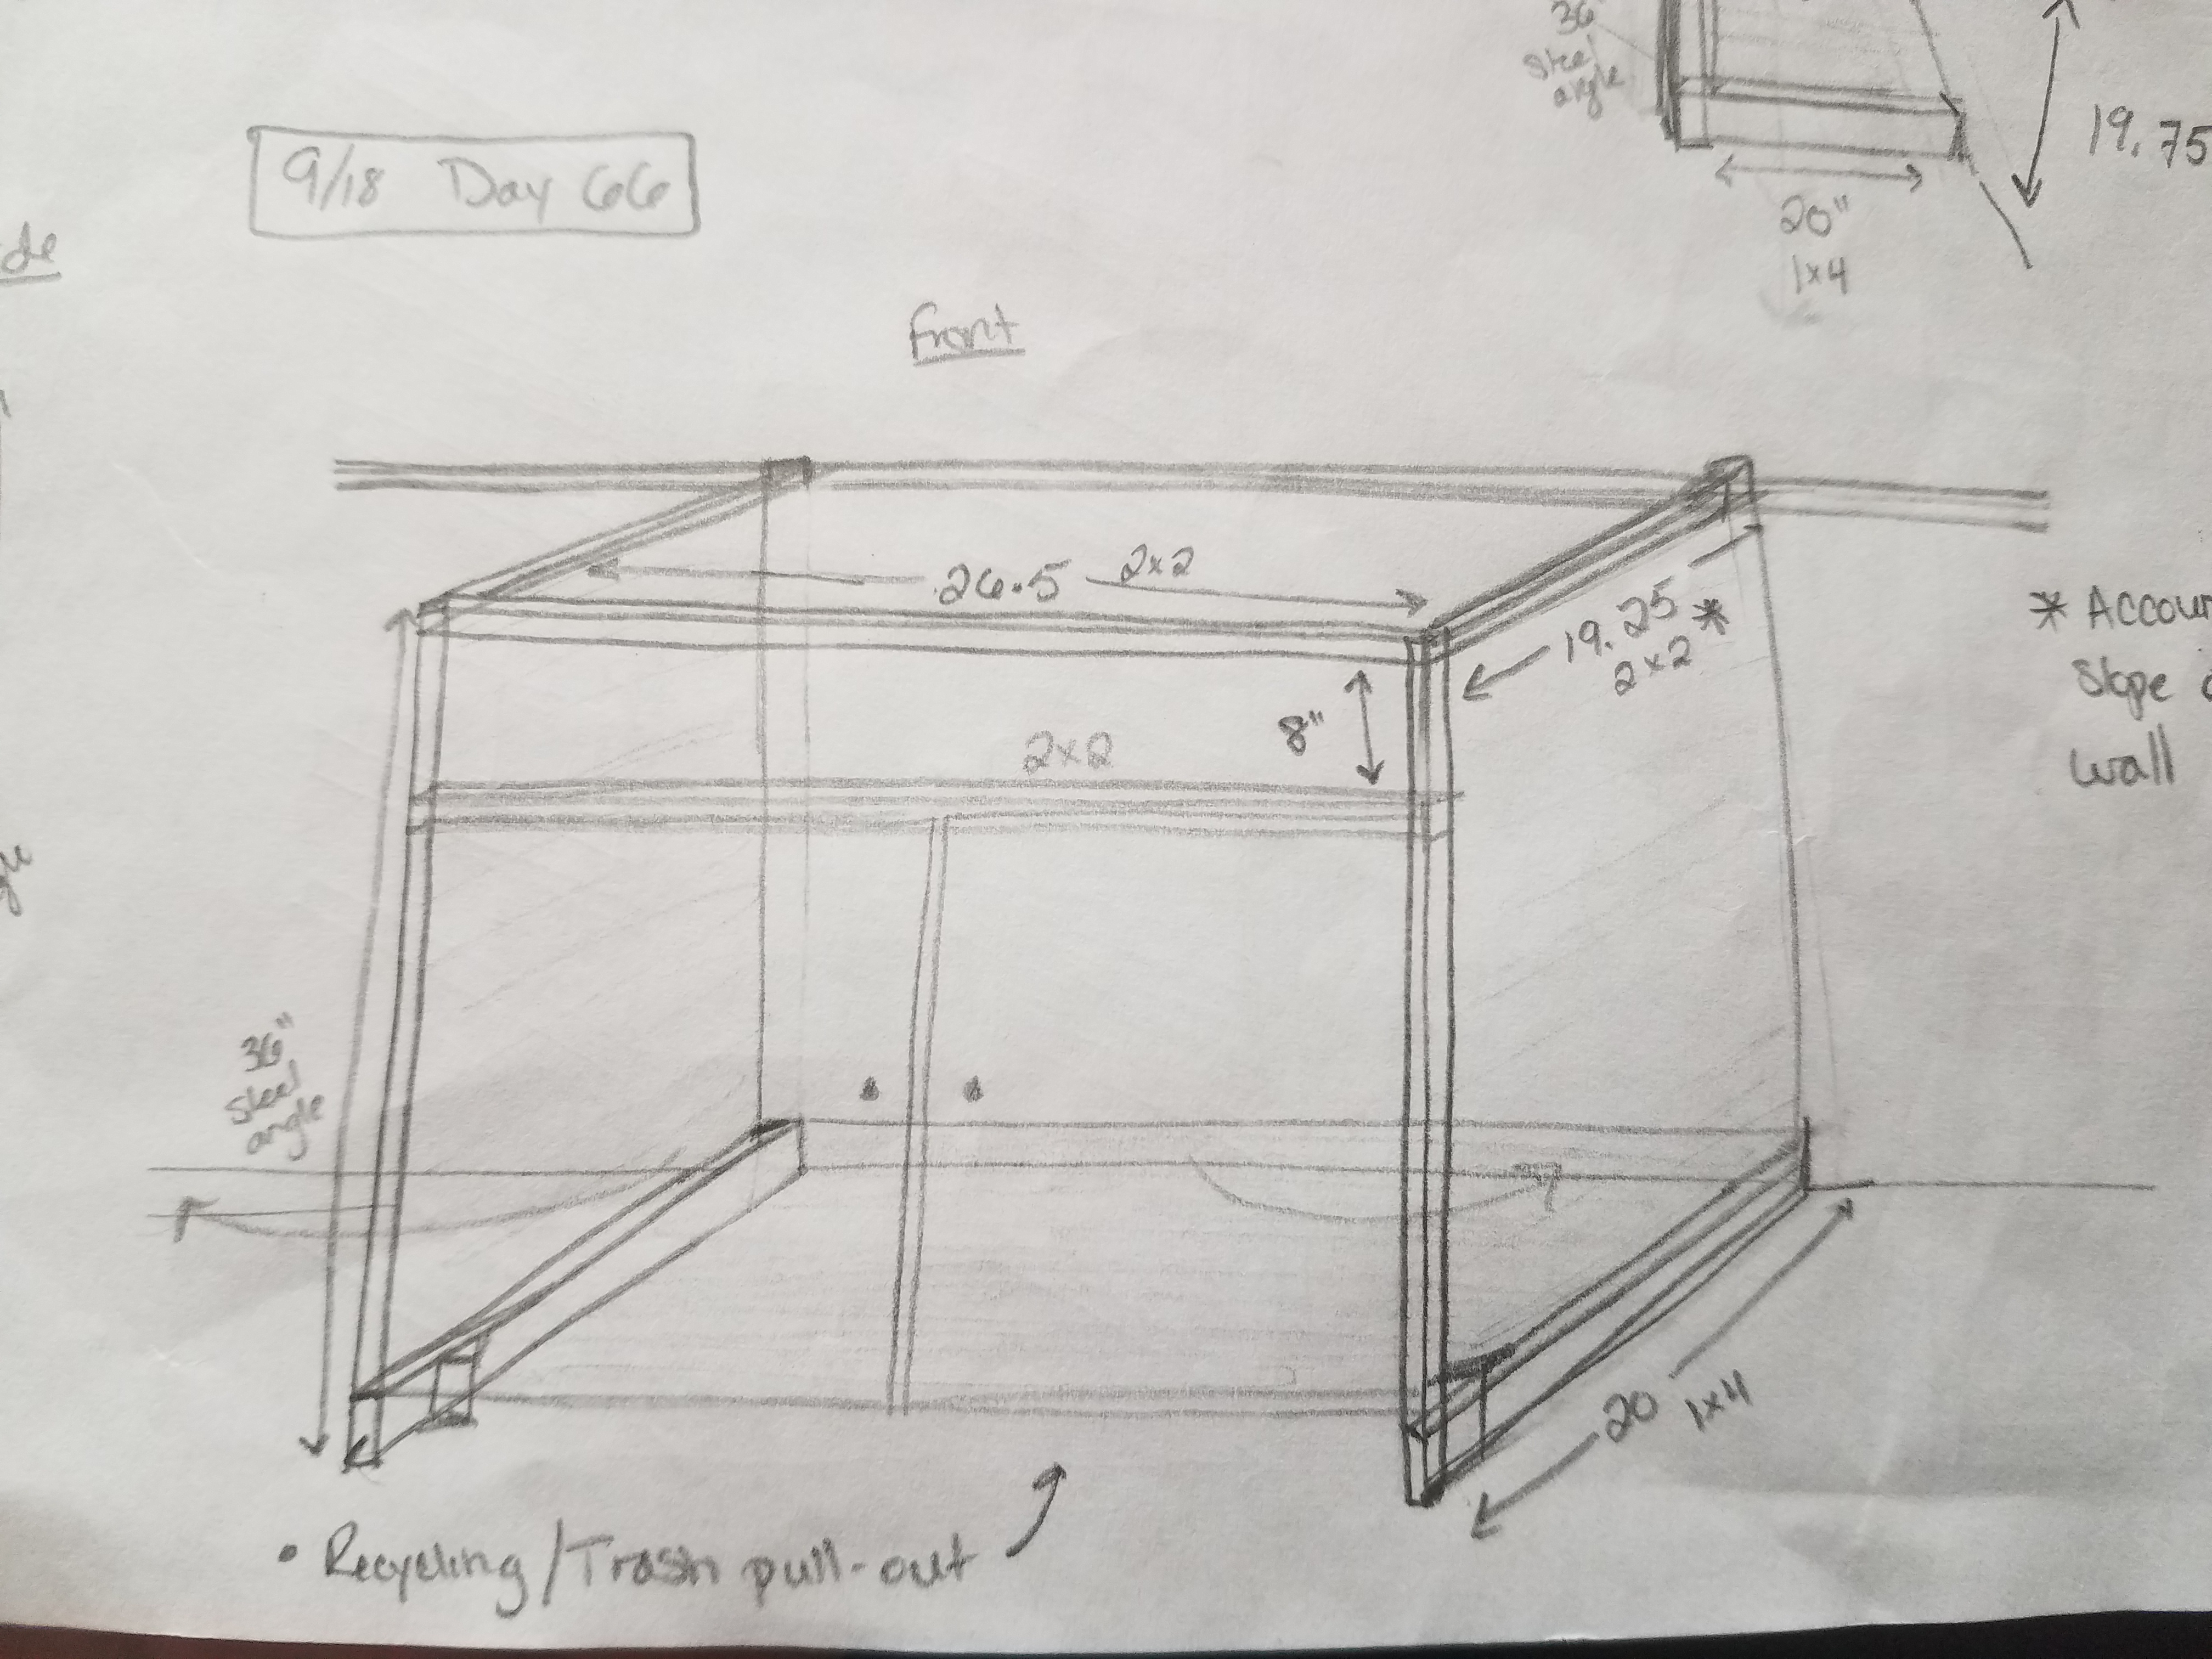 Schematic drawing of a cabinet for the travel trailer